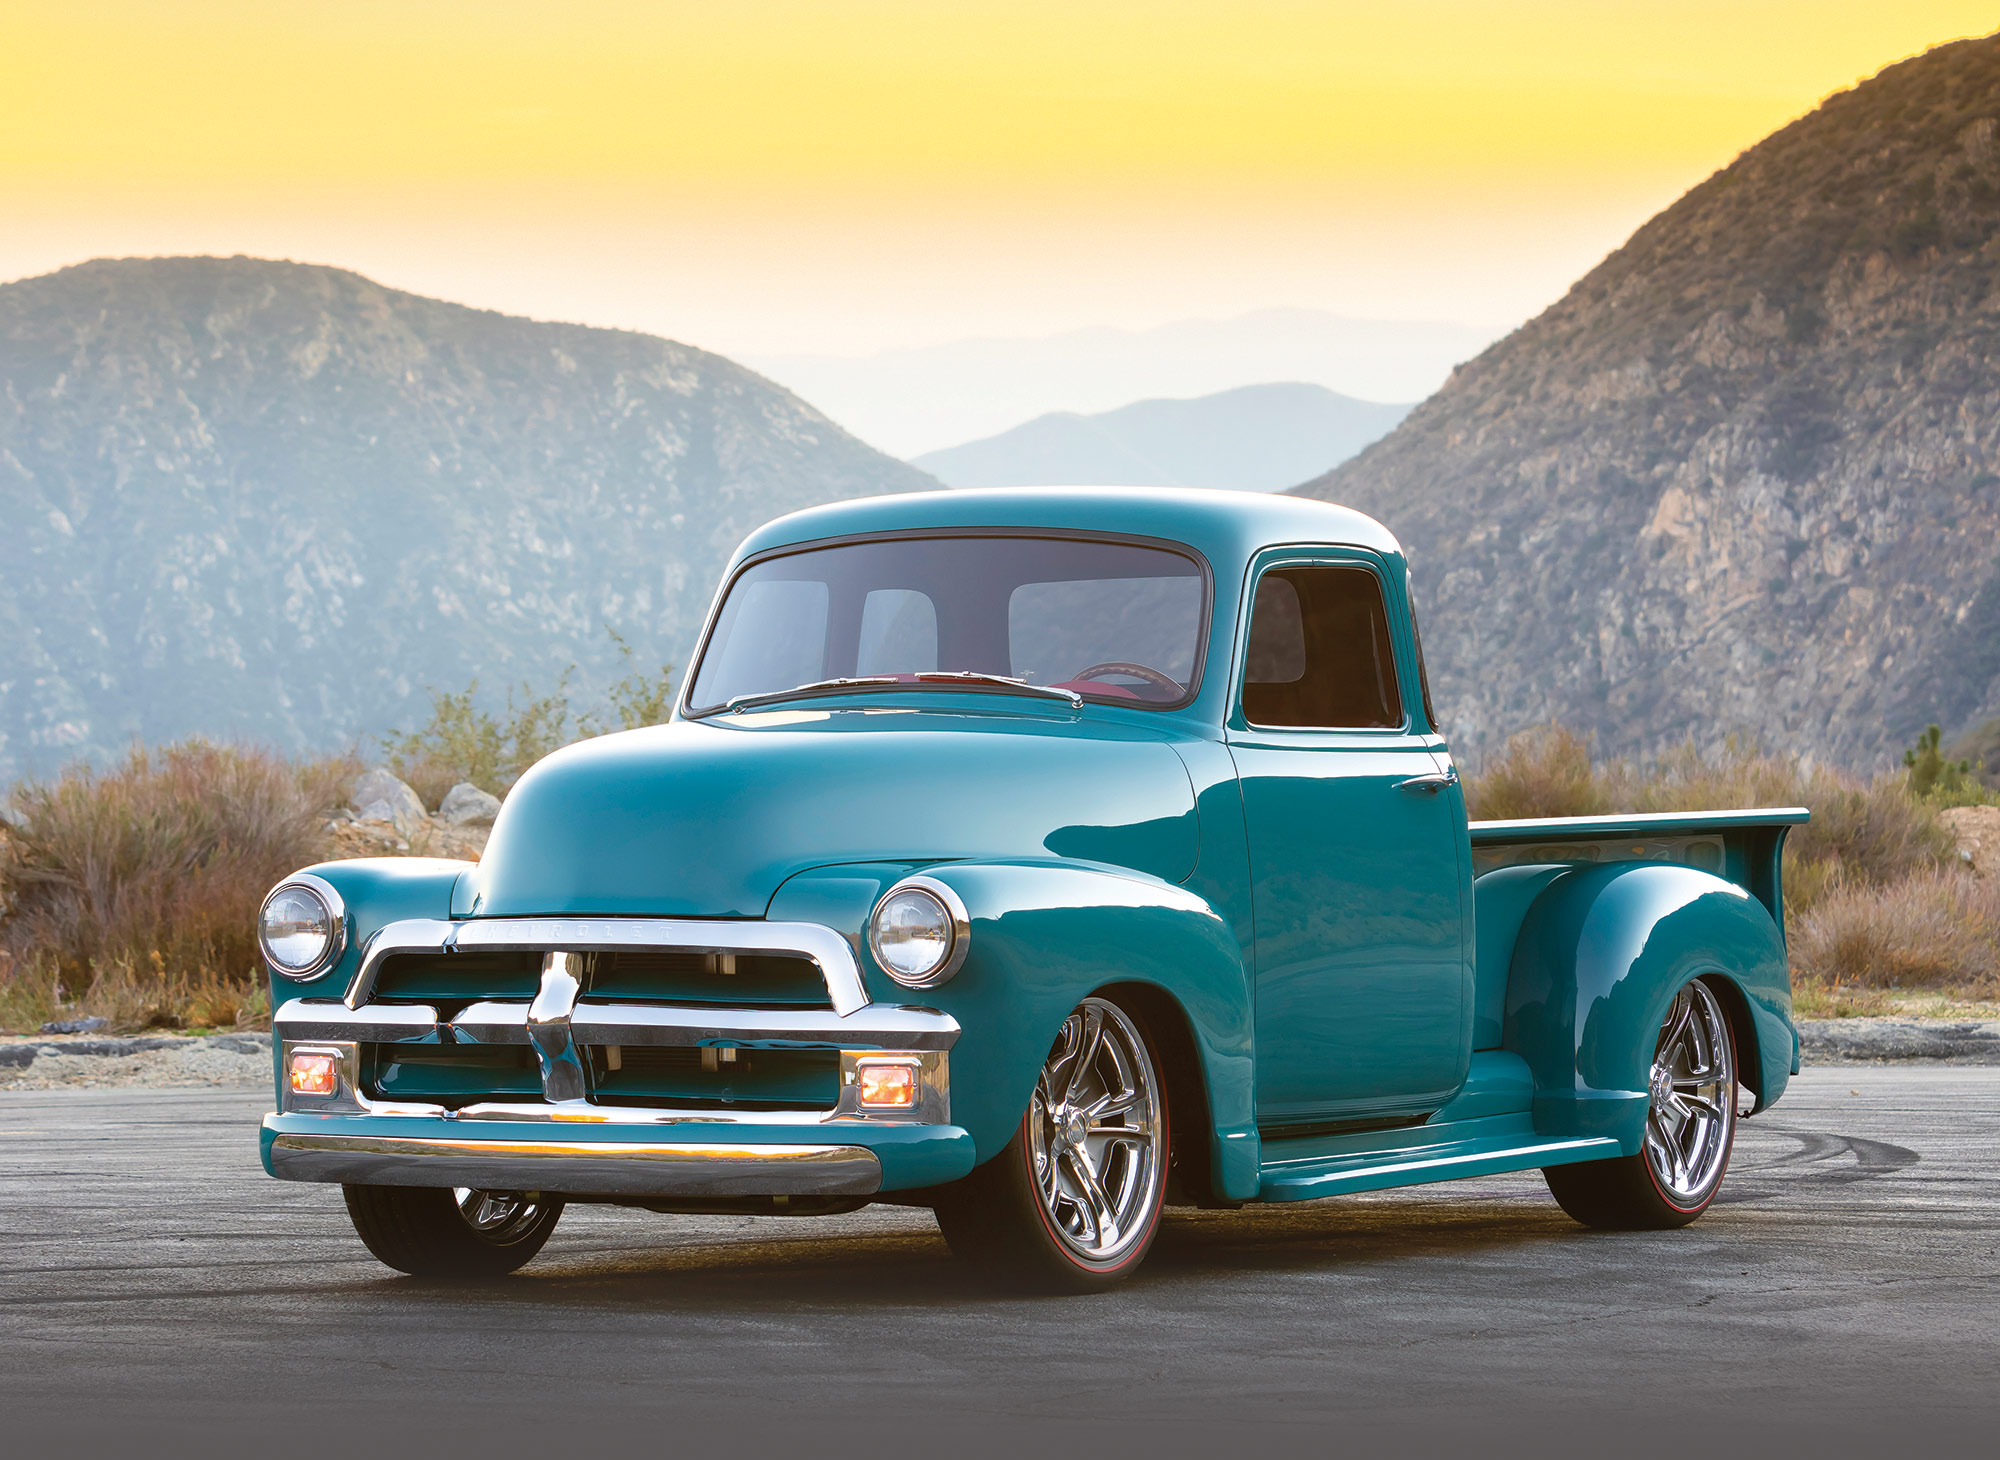 '54 Chevy in the desert with sun setting behind it